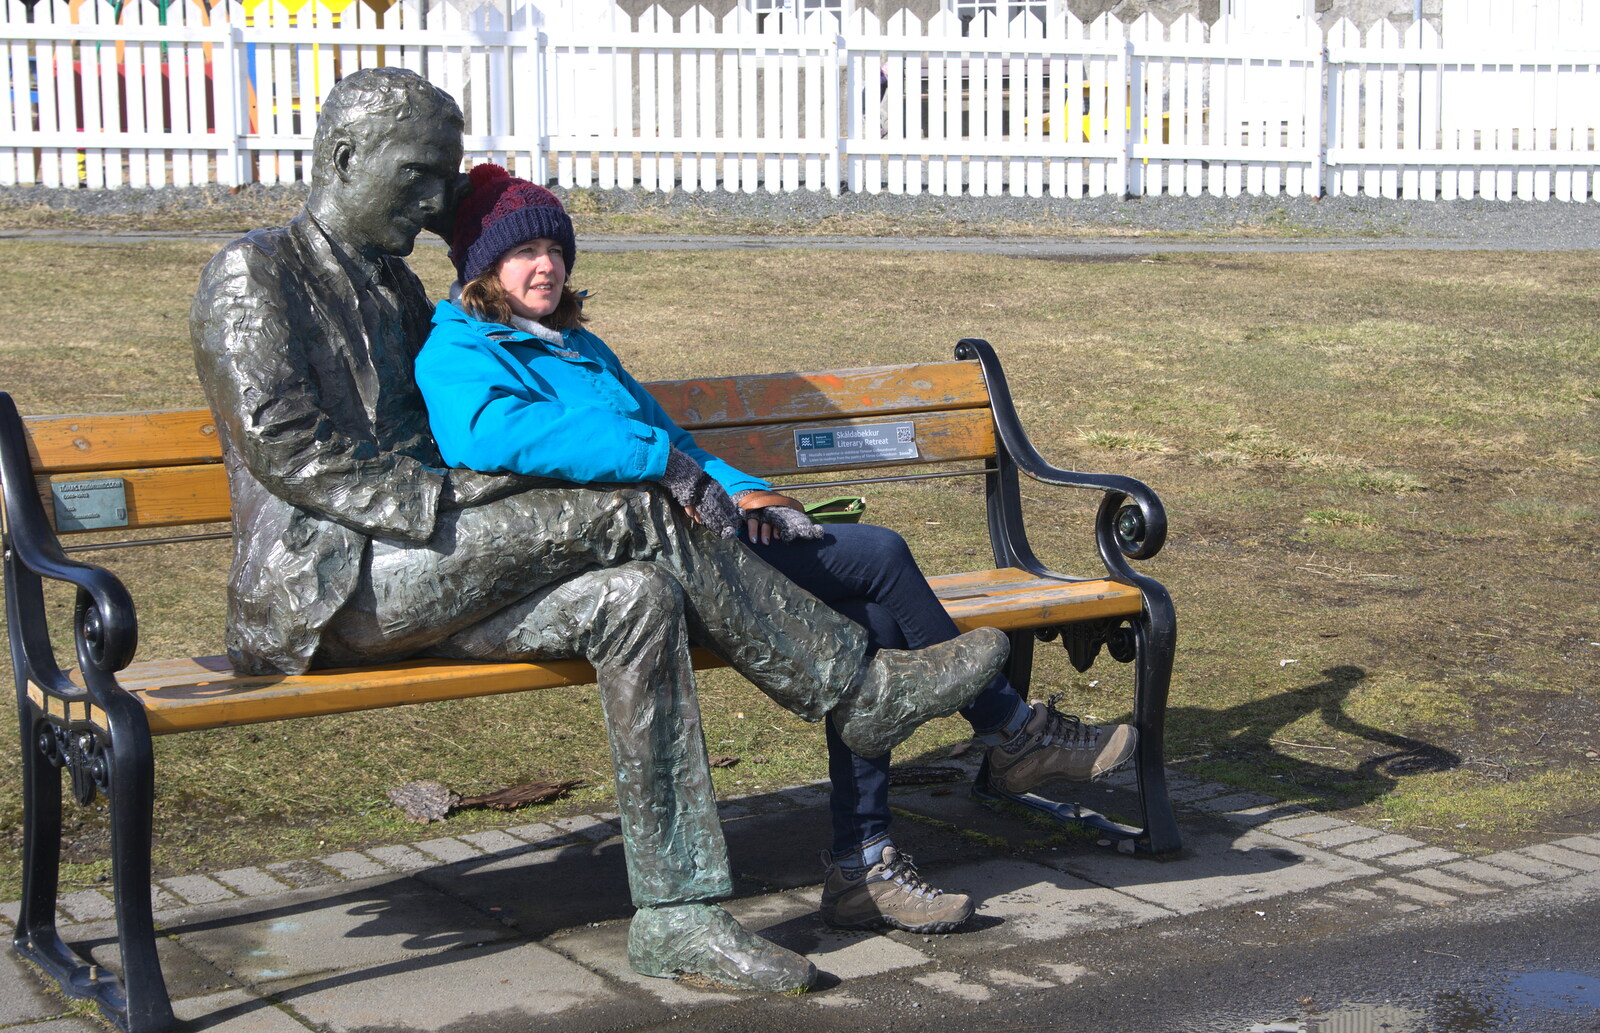 Isobel sits down with a bronze dude from Hallgrímskirkja Cathedral and Whale Watching, Reykjavik - 21st April 2017